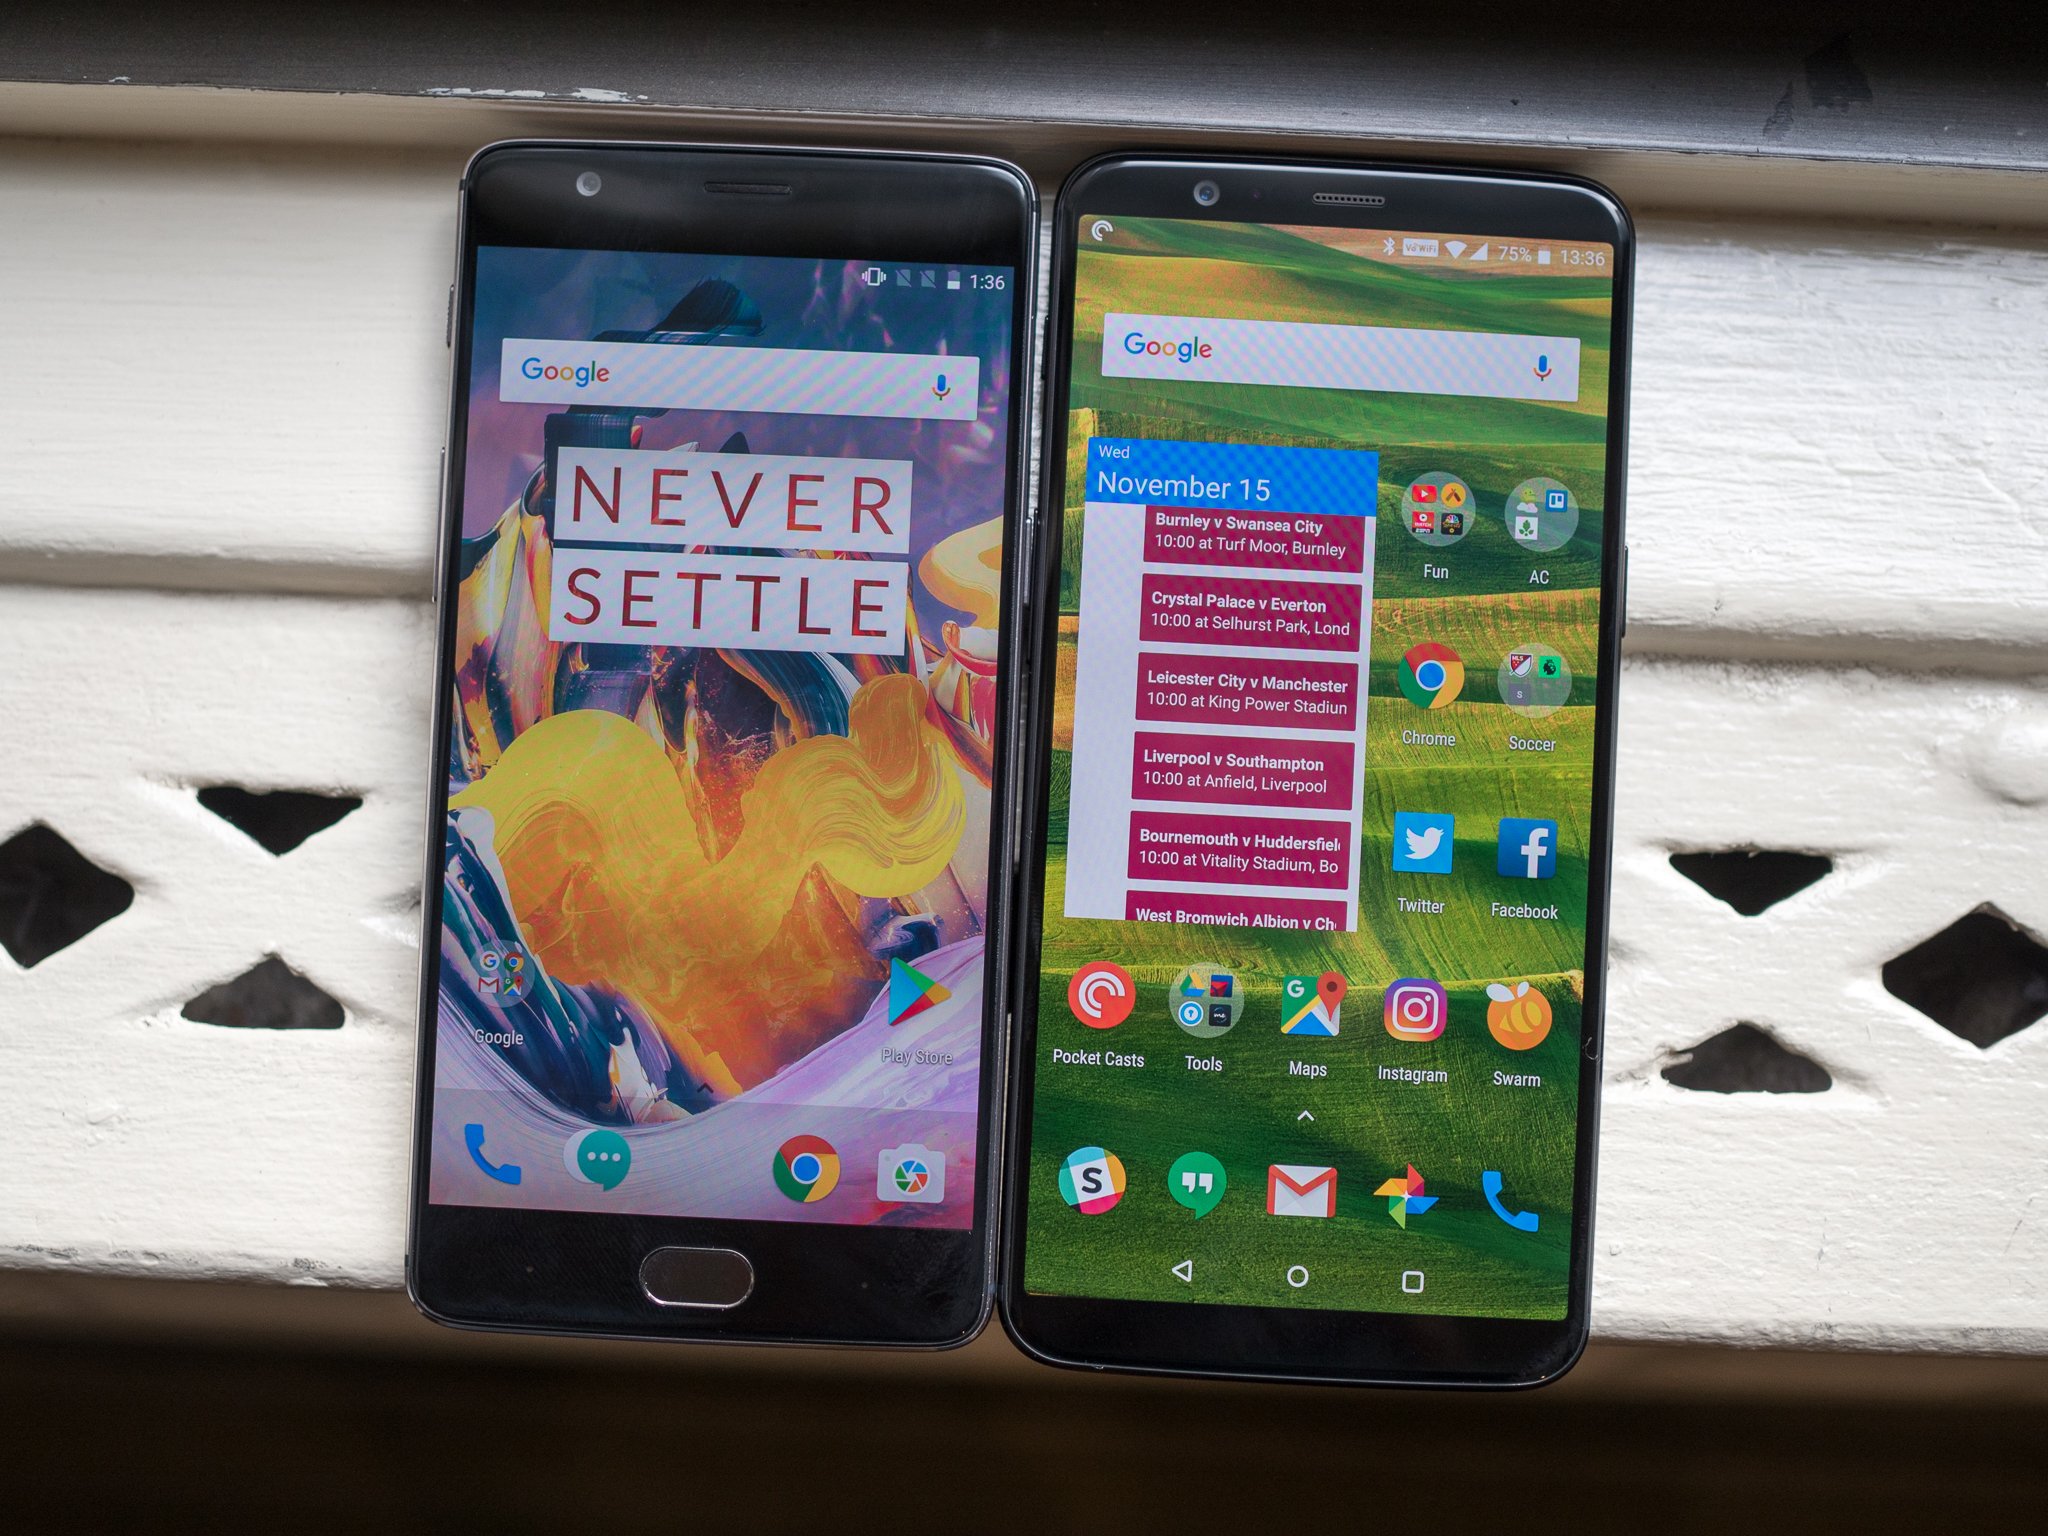 OnePlus 5T and OnePlus 3T